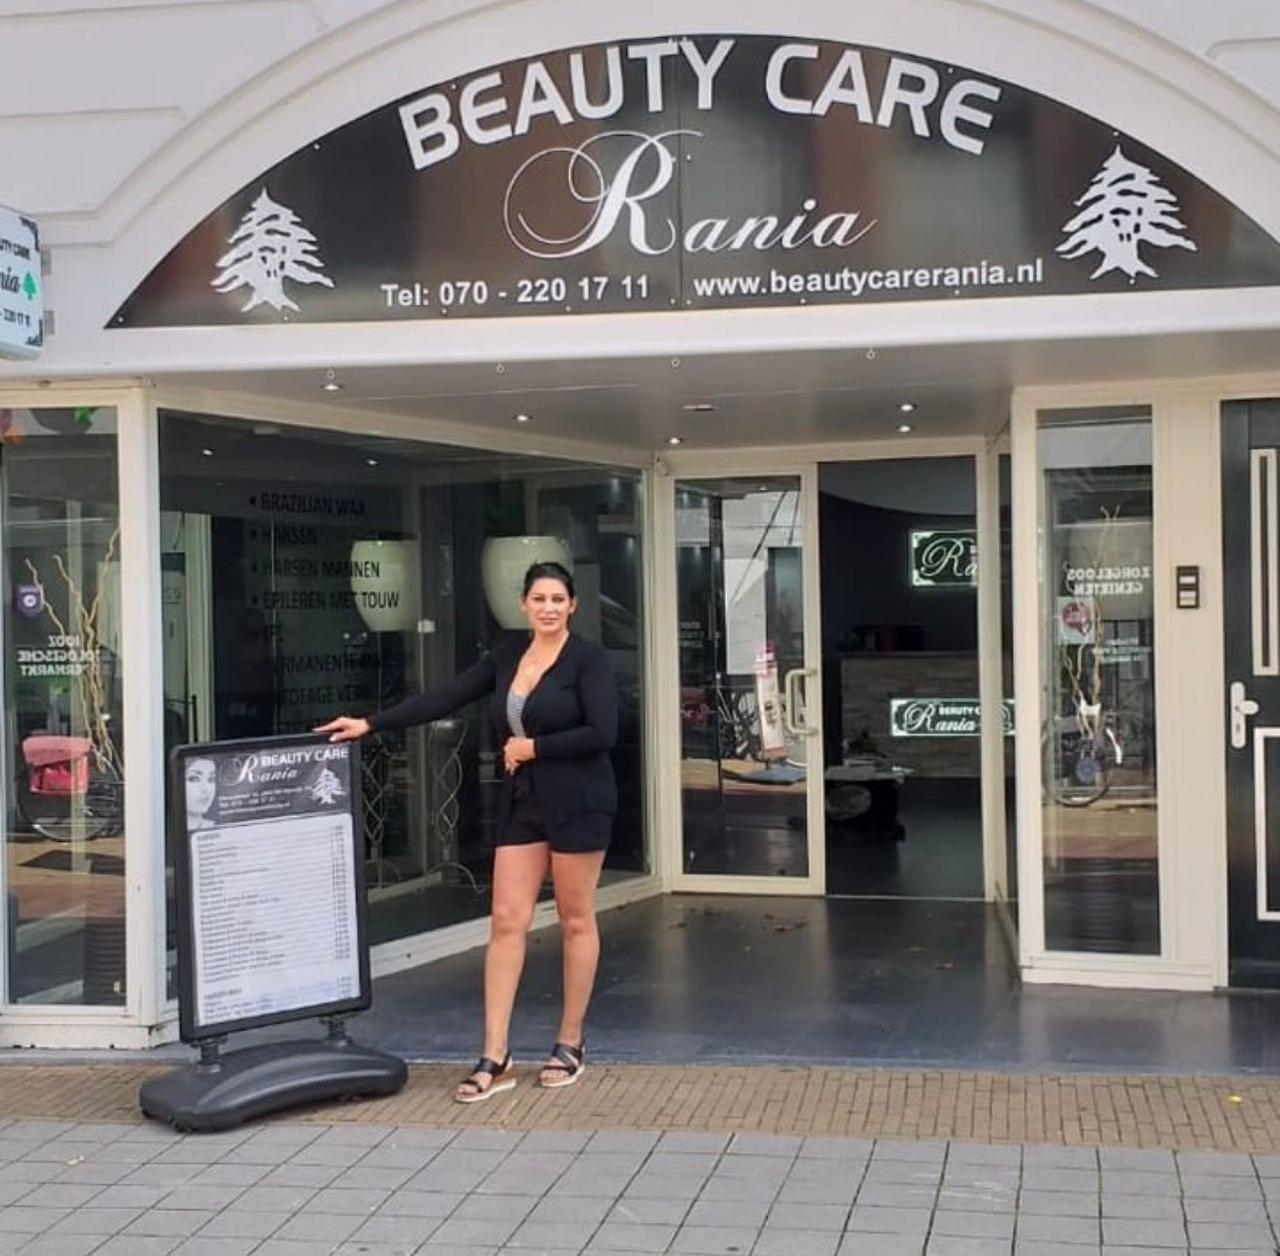 Beauty Care Rania, one of the best and most renowned beauty salons in Lebanon and the Netherlands